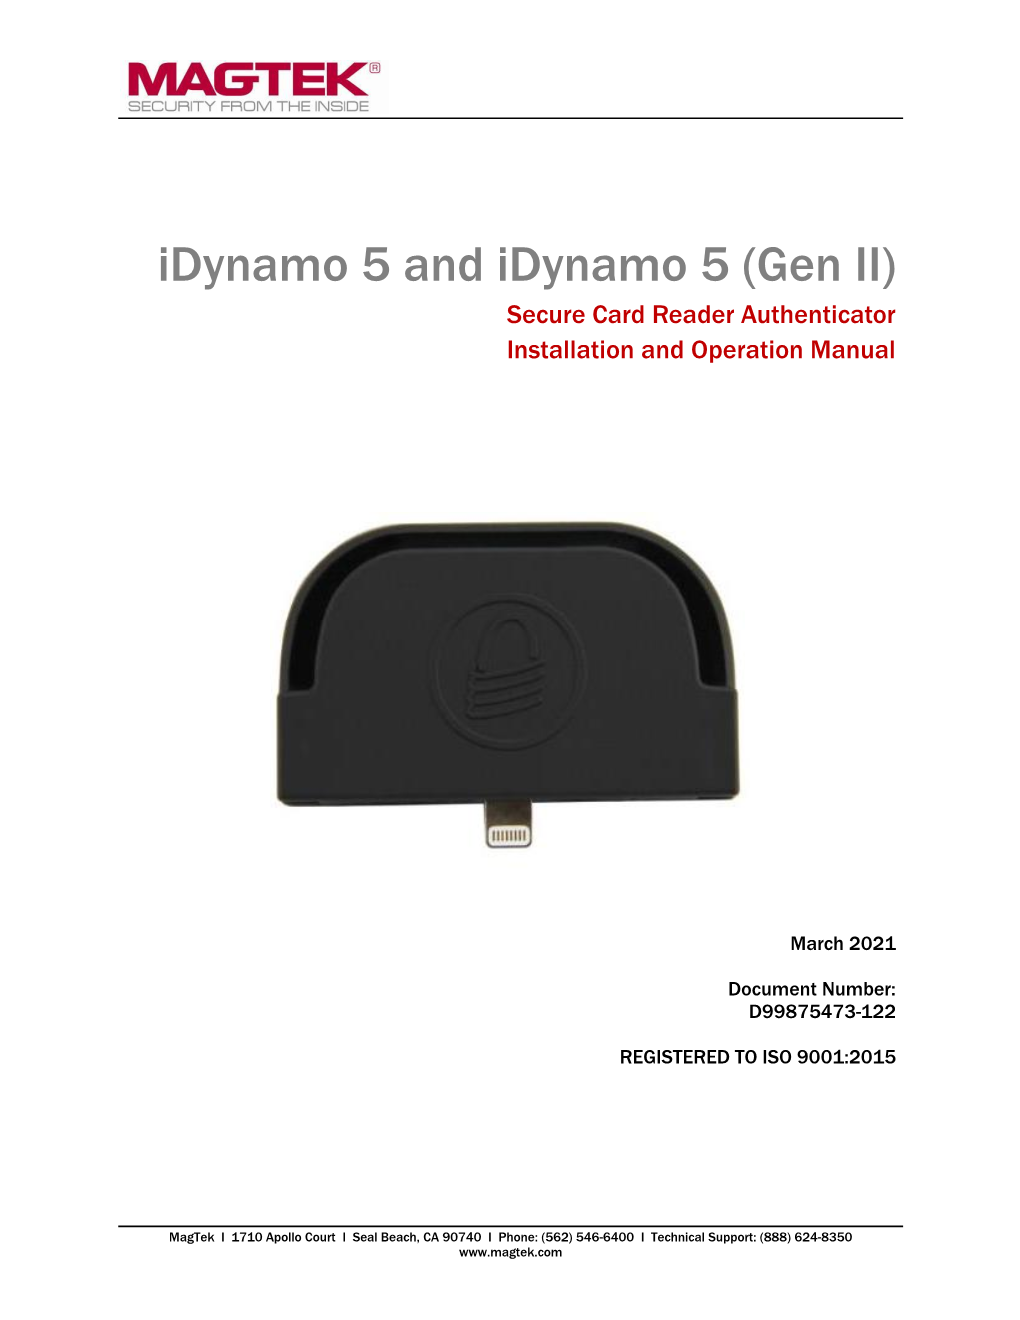 Idynamo 5 and Idynamo 5 (Gen II) Secure Card Reader Authenticator Installation and Operation Manual